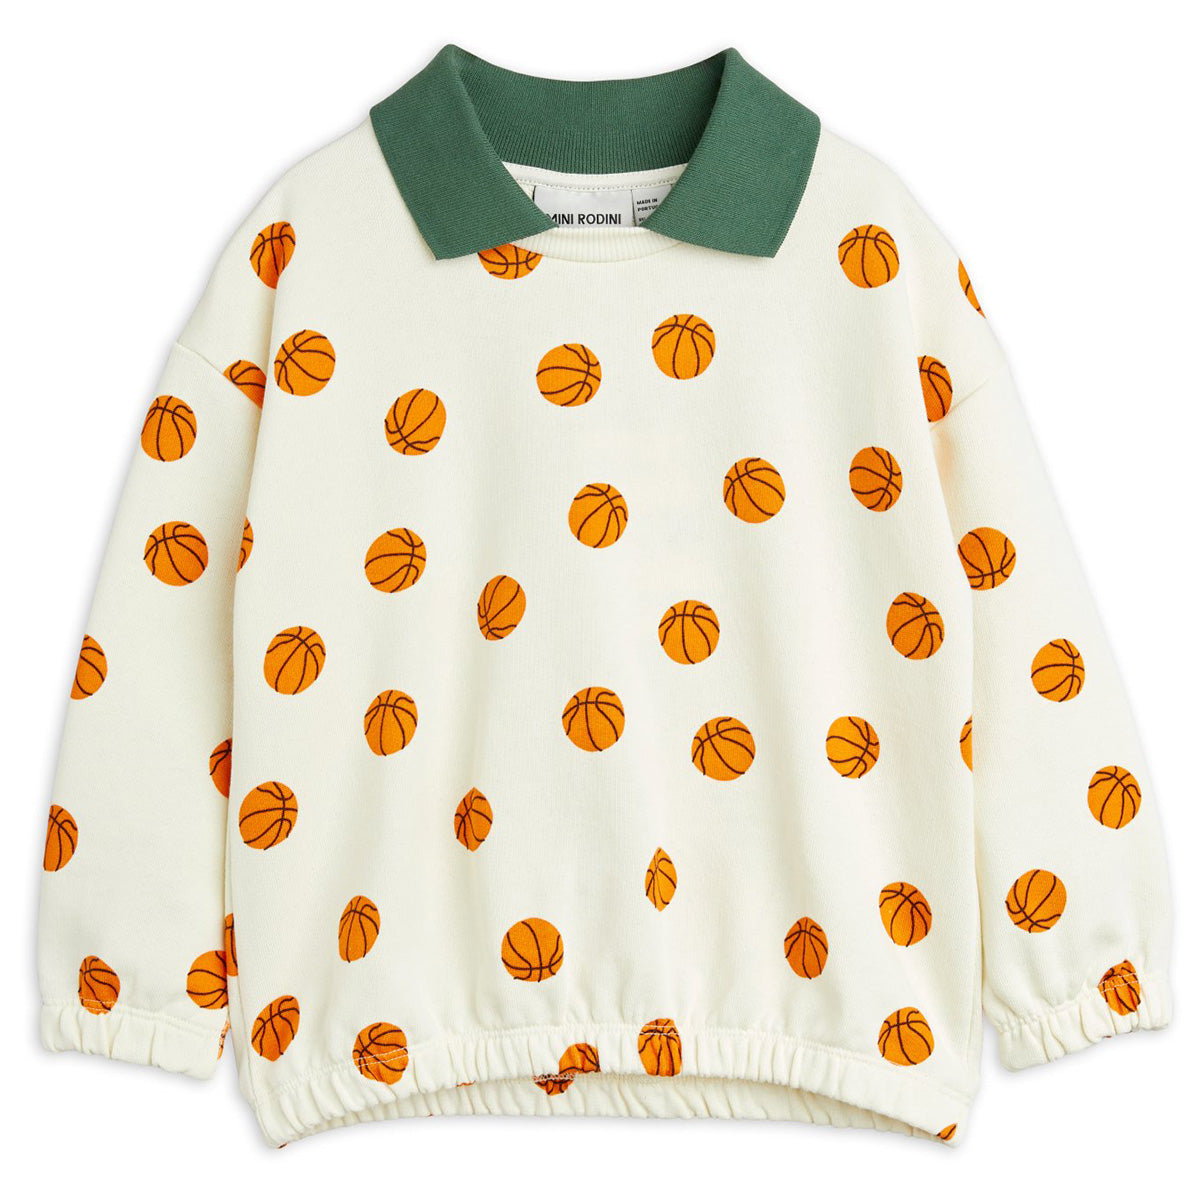 The Basketball Collared Sweatshirt from Mini Rodini. Relaxed fit sweatshirt with contrasting collar and ribbed trims.